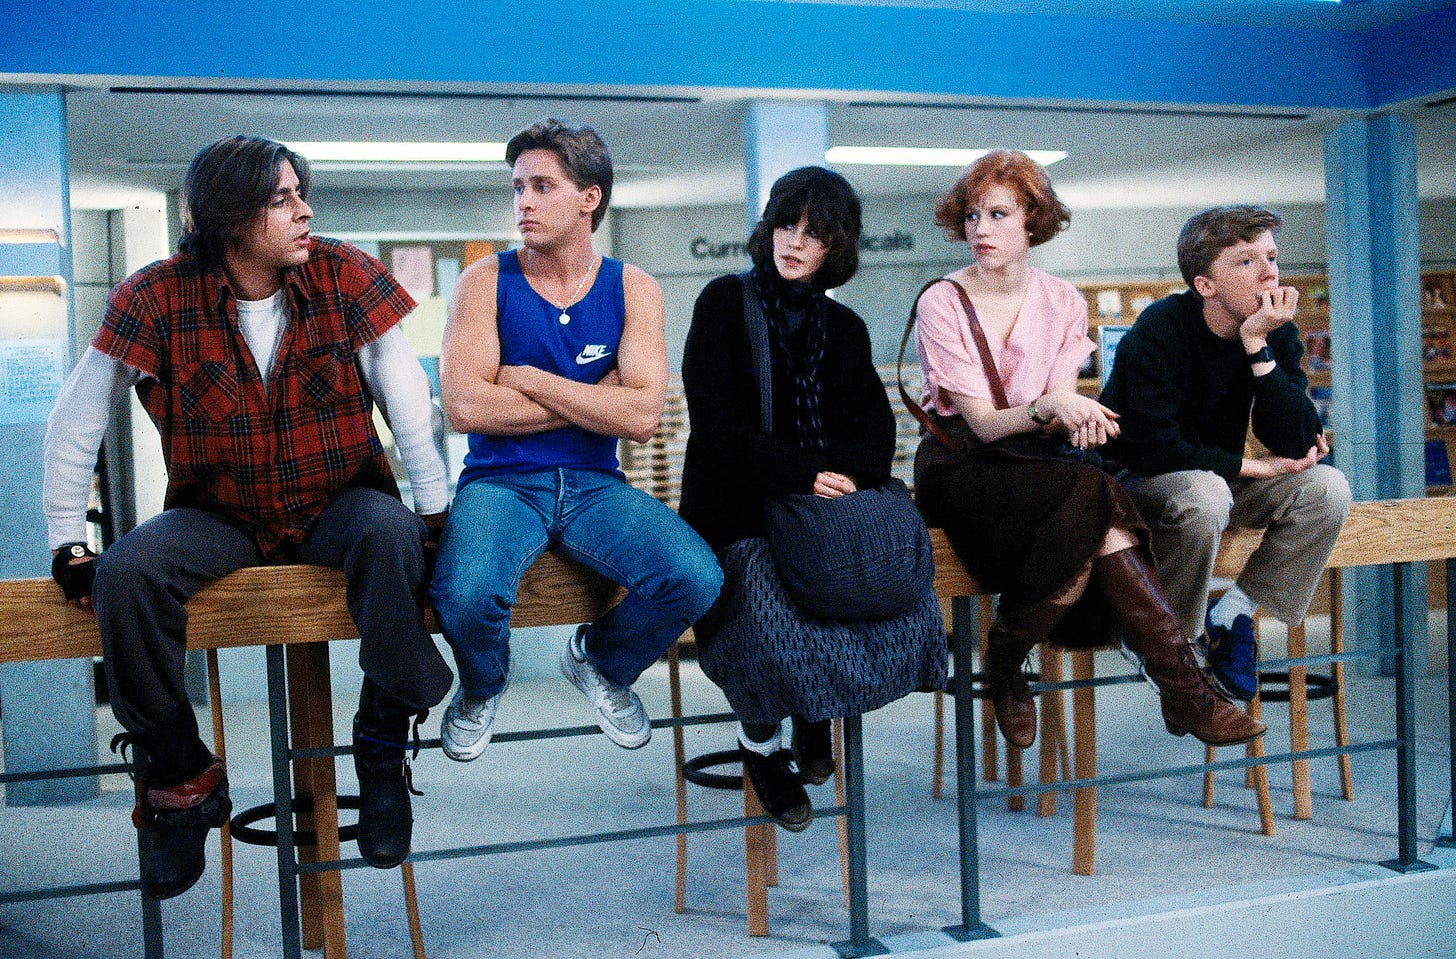 Don't You Forget About Me: 'Breakfast Club' at 30